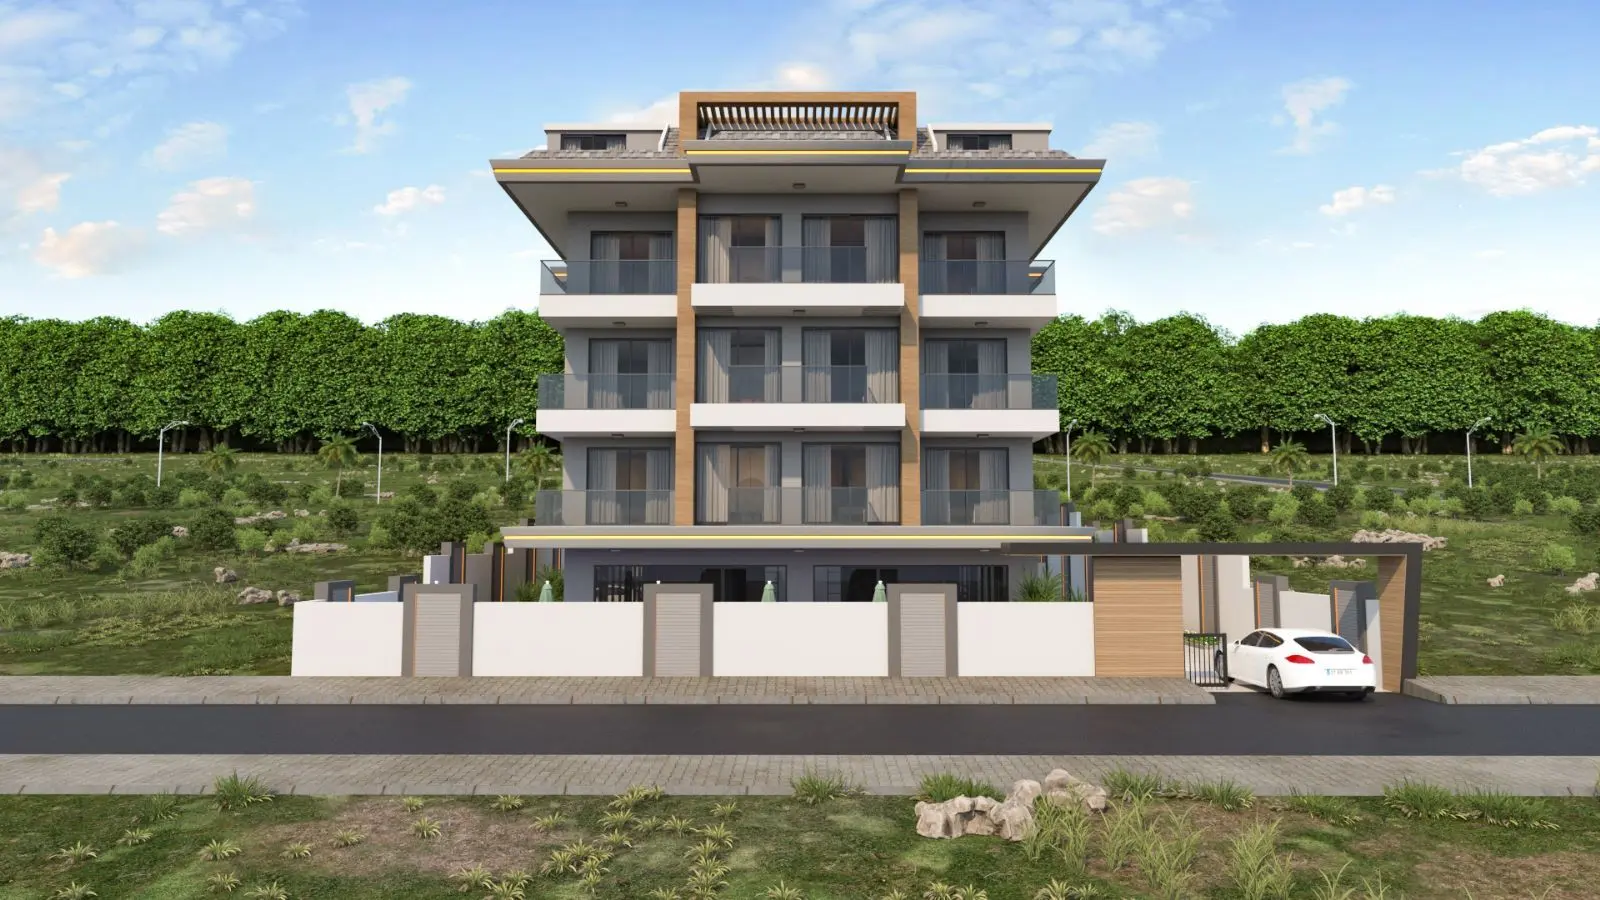 NEW PROJECT WITHIN WALKING DISTANCE TO THE FAMOUS CLEOPATRA BEACH